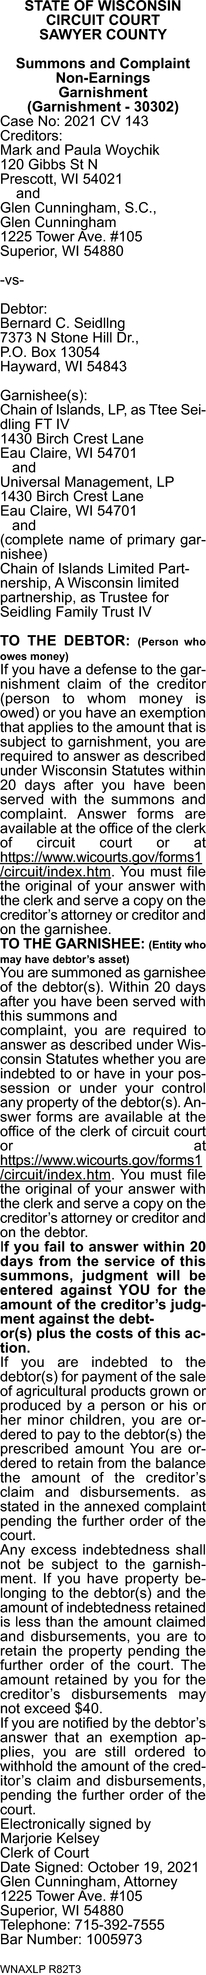 Summons And Complaint Non-Earning Garnishment